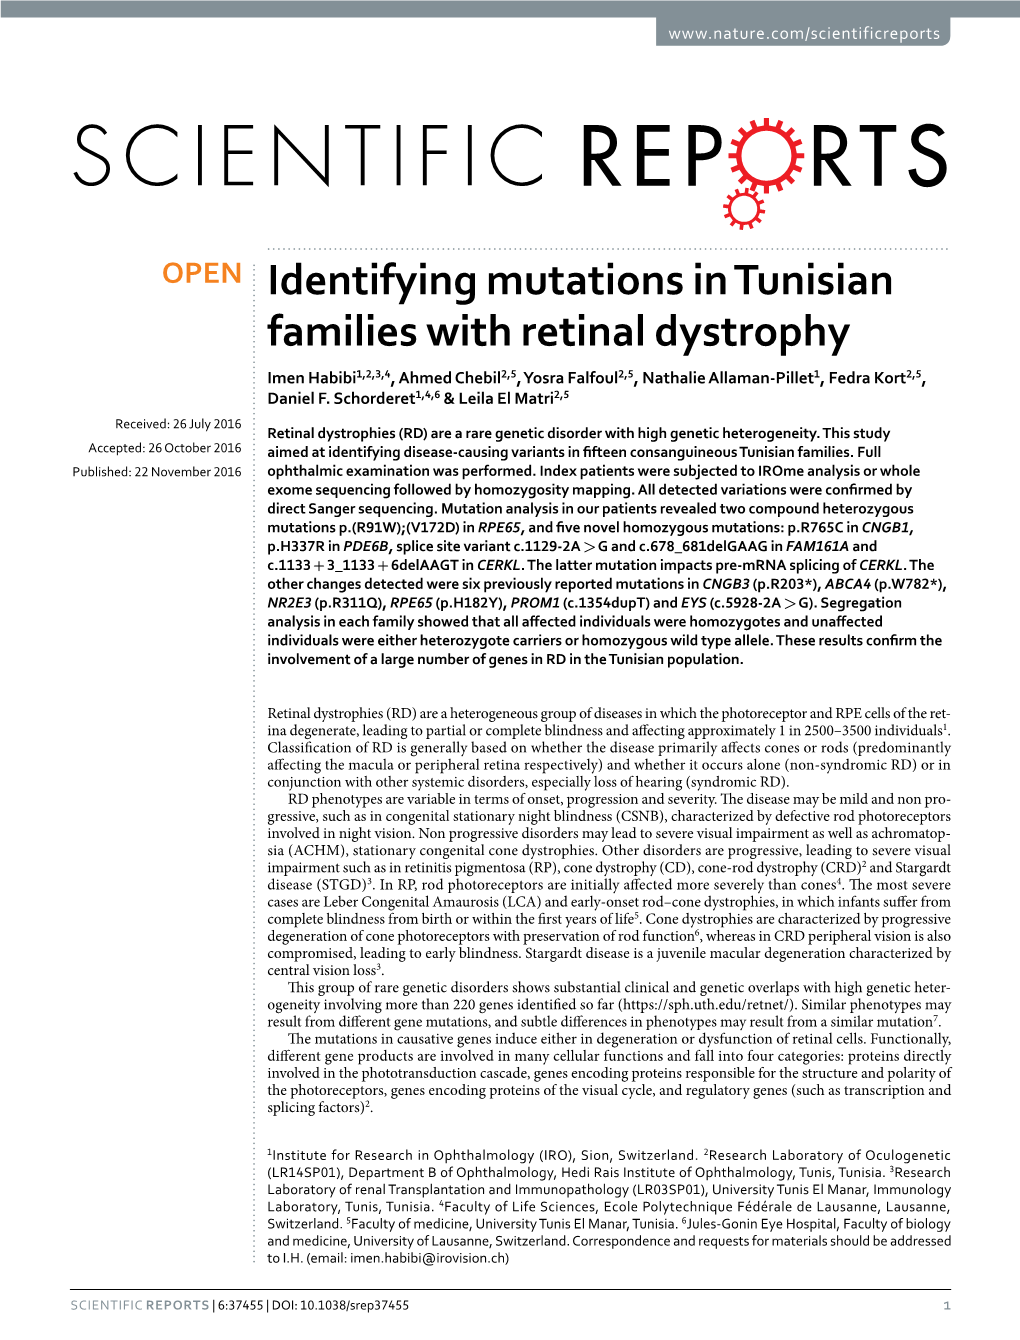 Identifying Mutations in Tunisian Families with Retinal Dystrophy